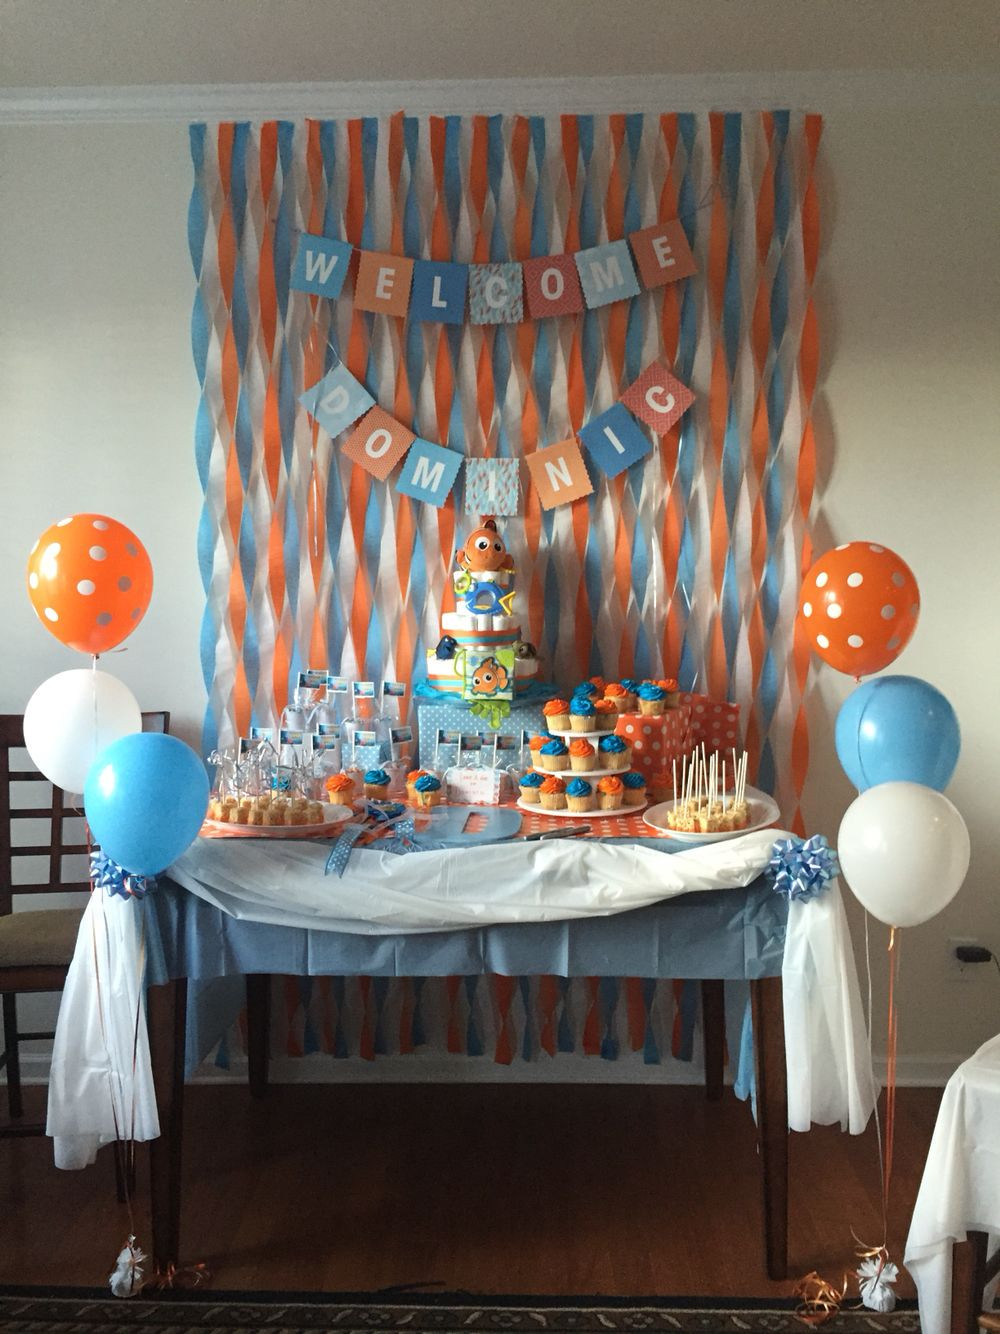 Baby Shower Wall Decorations Ideas
 Finding nemo baby shower